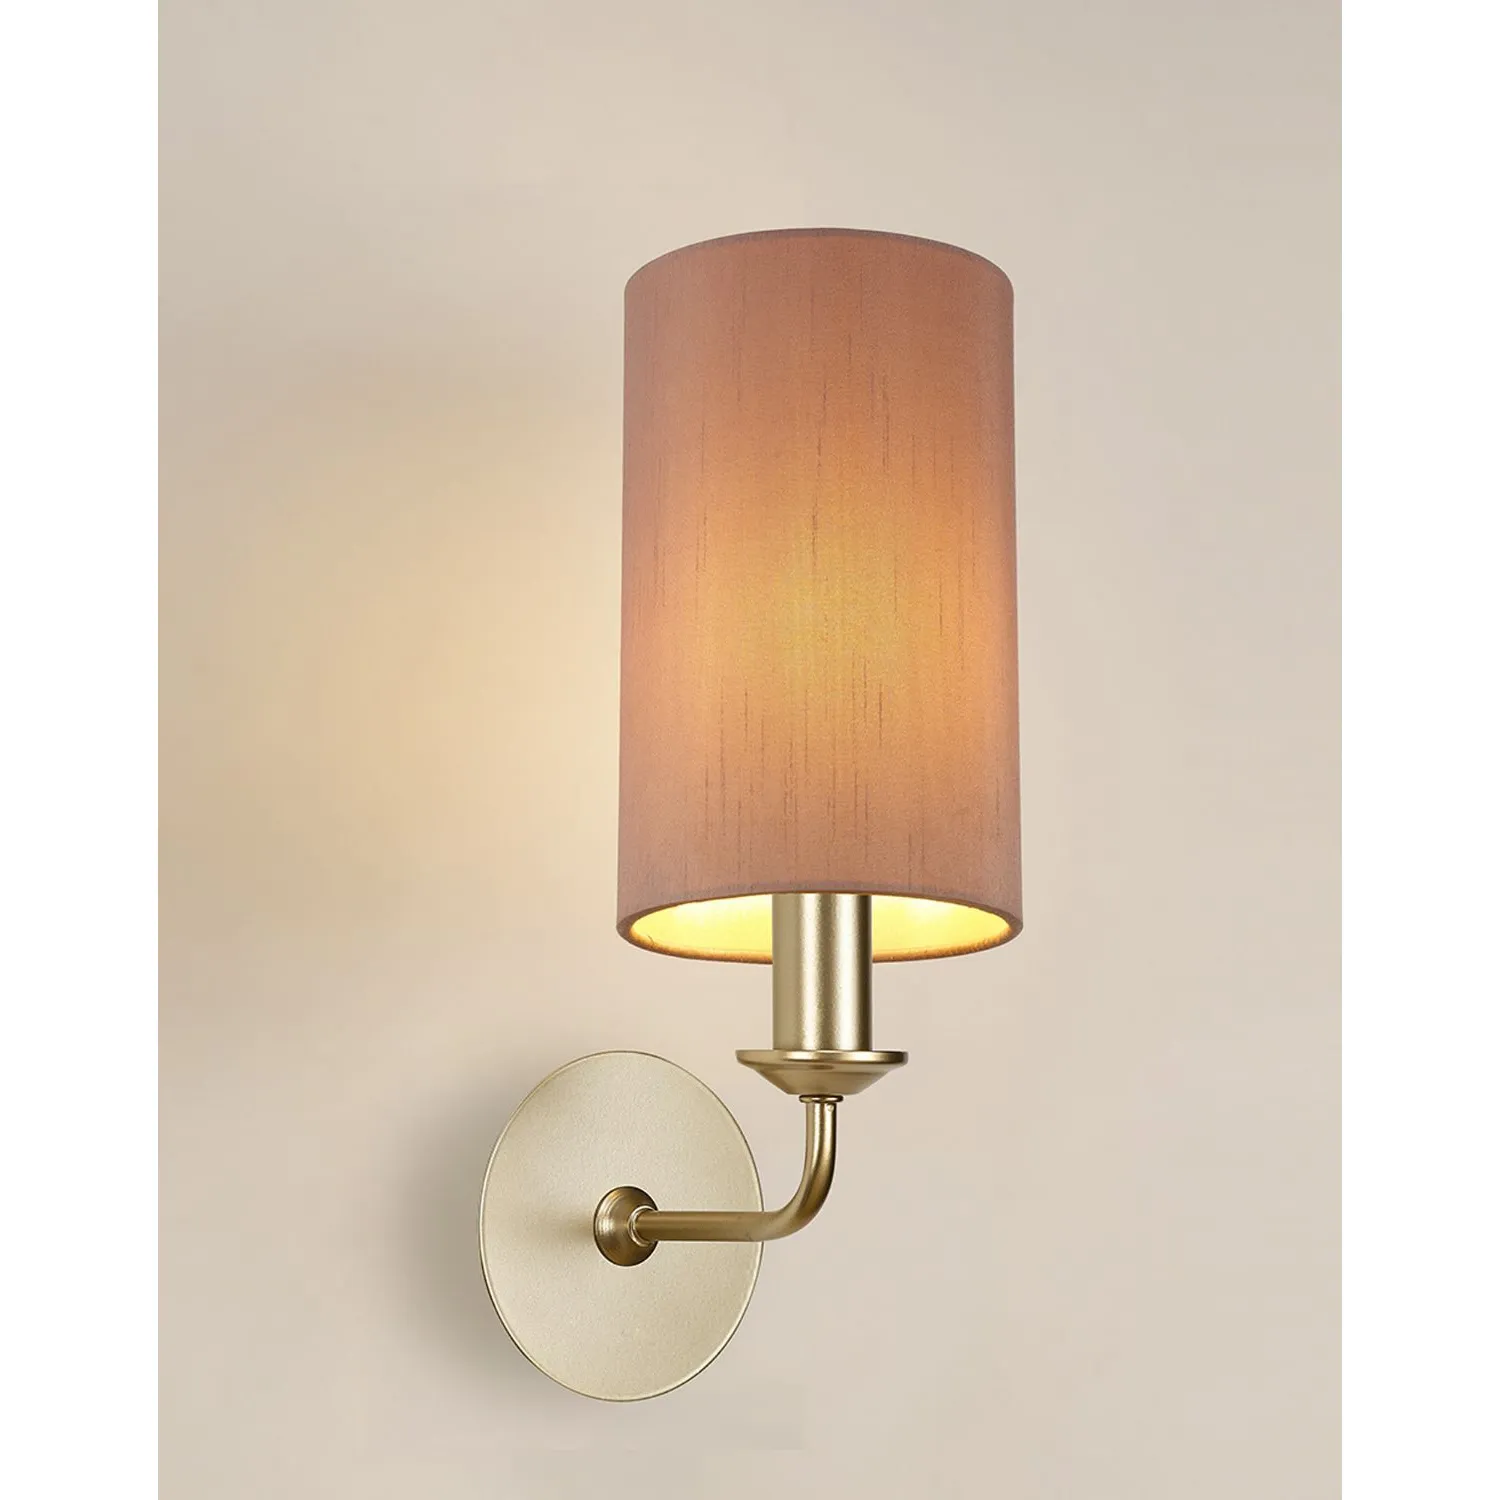 Banyan 1 Light Switched Wall Lamp With 120 x 200mm Dual Faux Silk Fabric Shade Painted Champagne Gold Taupe